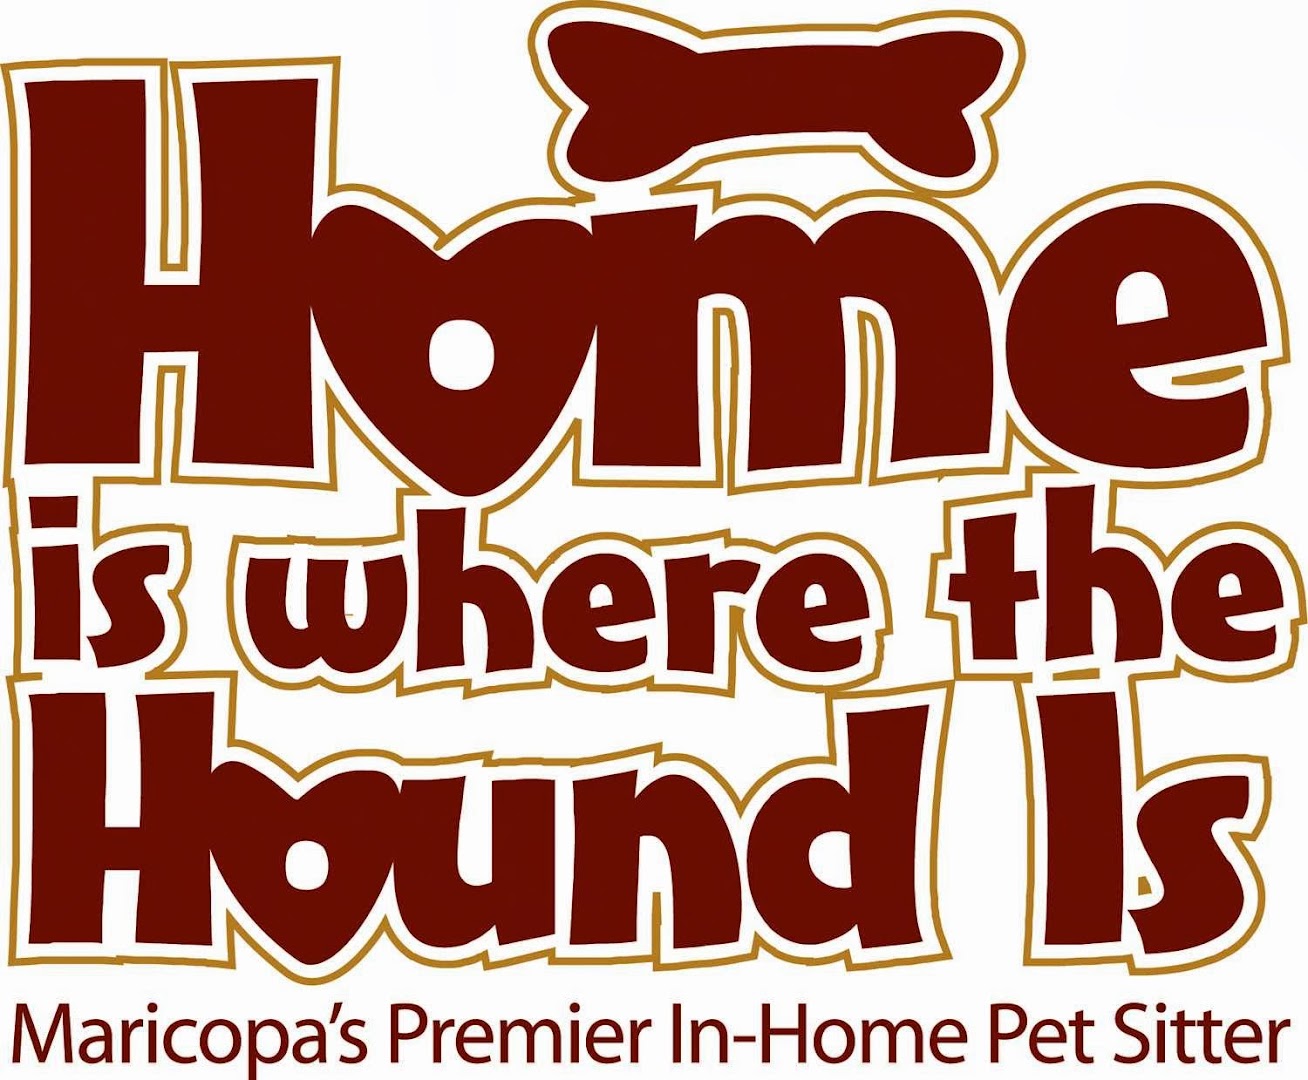 Home Is Where The Hound Is, LLC